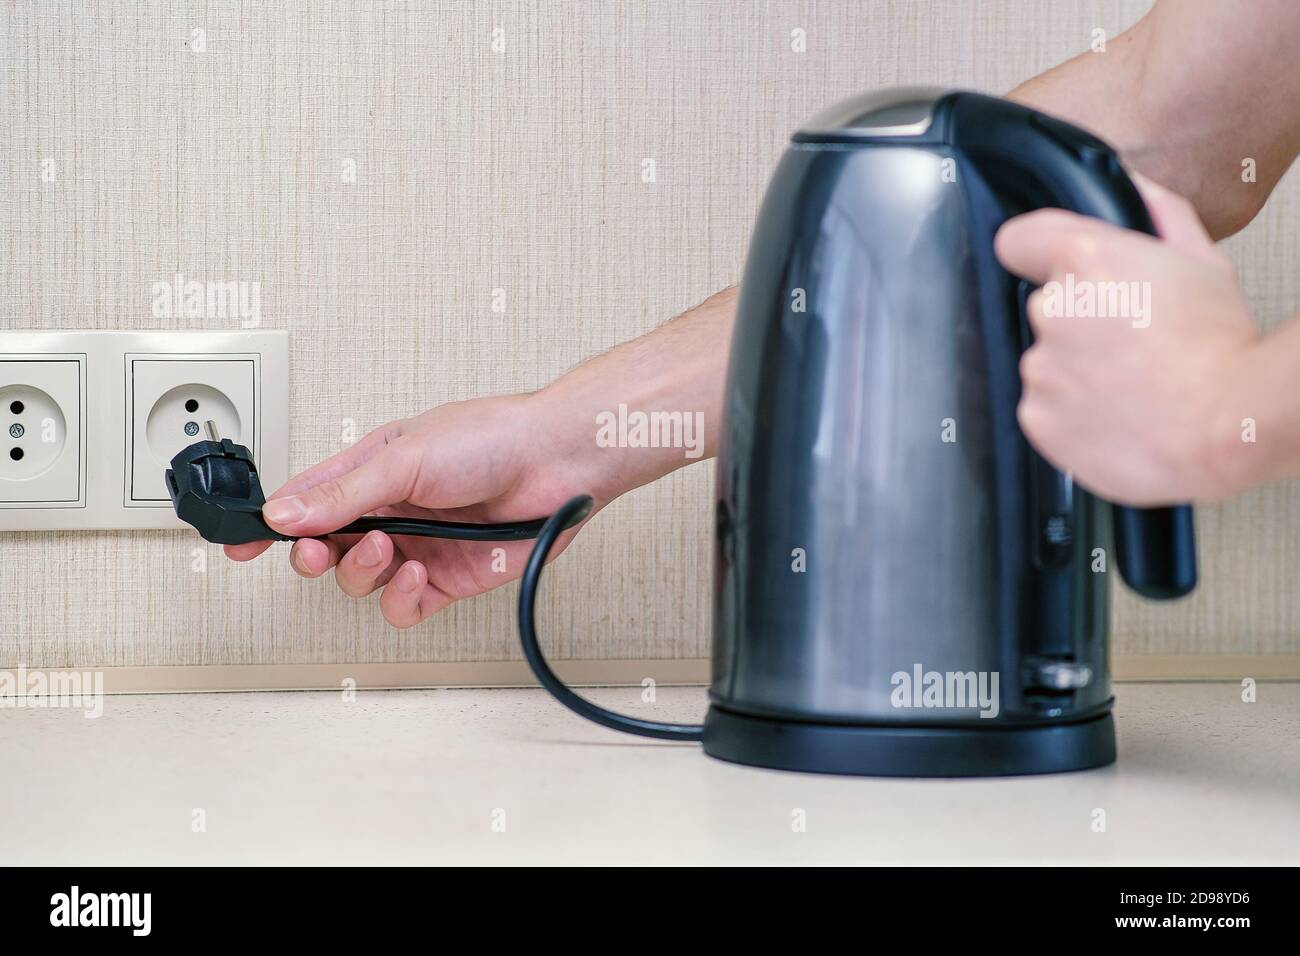 https://c8.alamy.com/comp/2D98YD6/the-man-holds-the-electric-power-in-his-hand-and-connects-the-kettle-to-the-outlet-2D98YD6.jpg